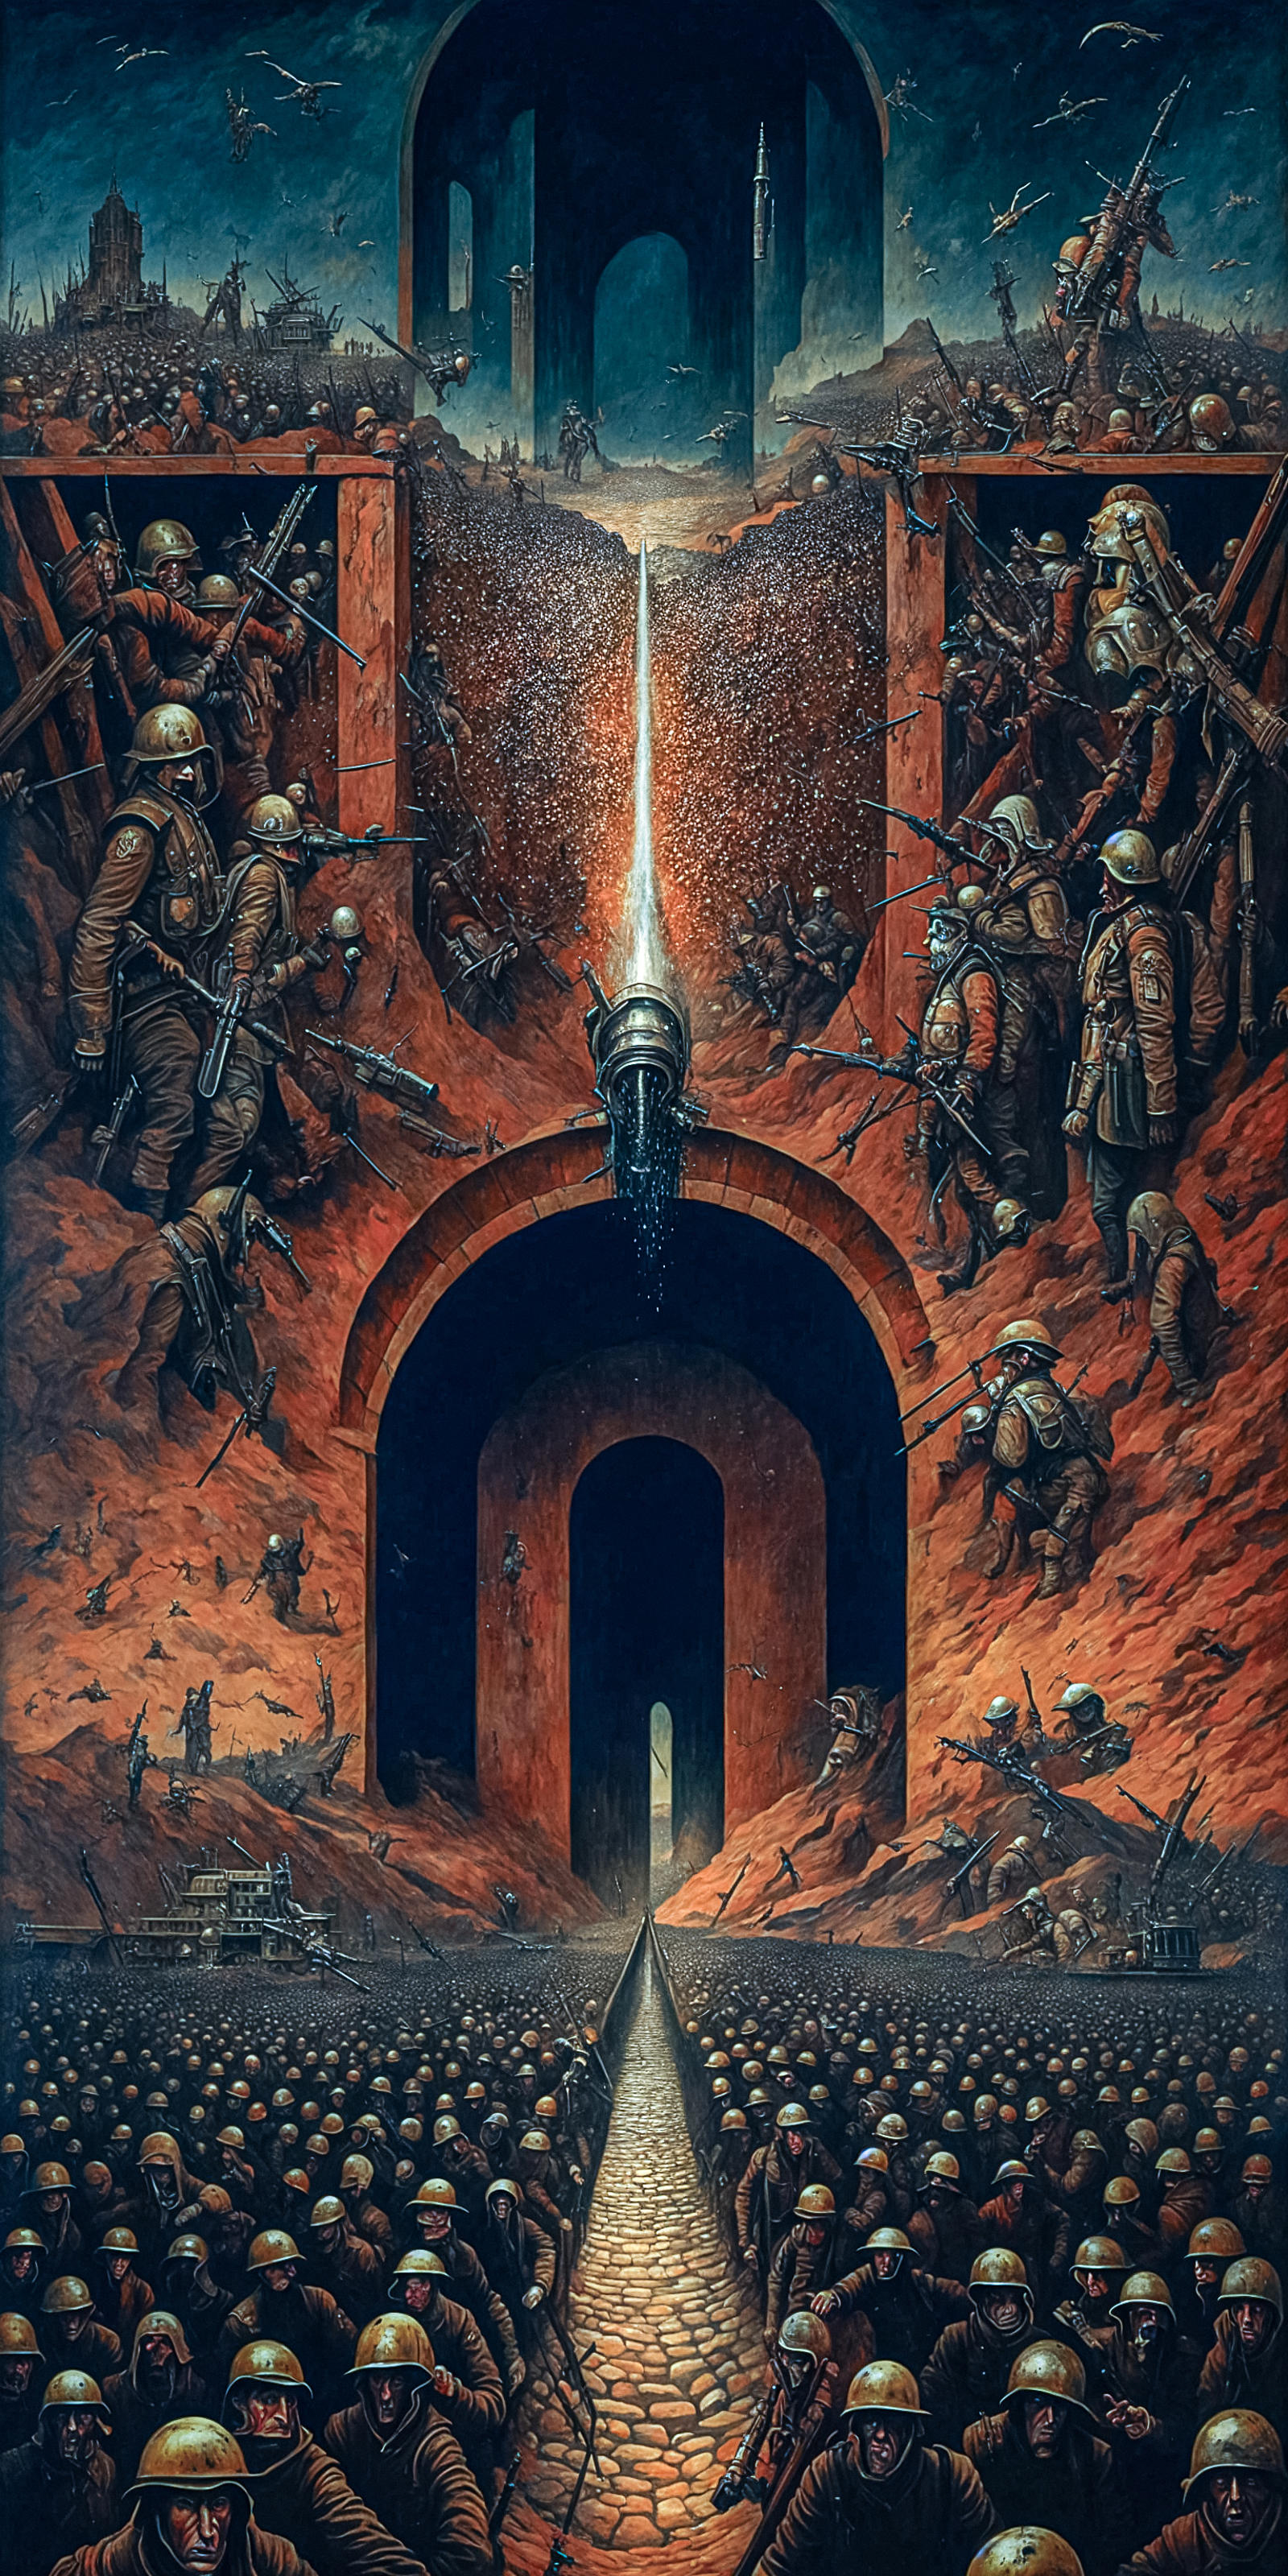 The Battle of the Somme: A Painting Depicting Soldiers in a Trench